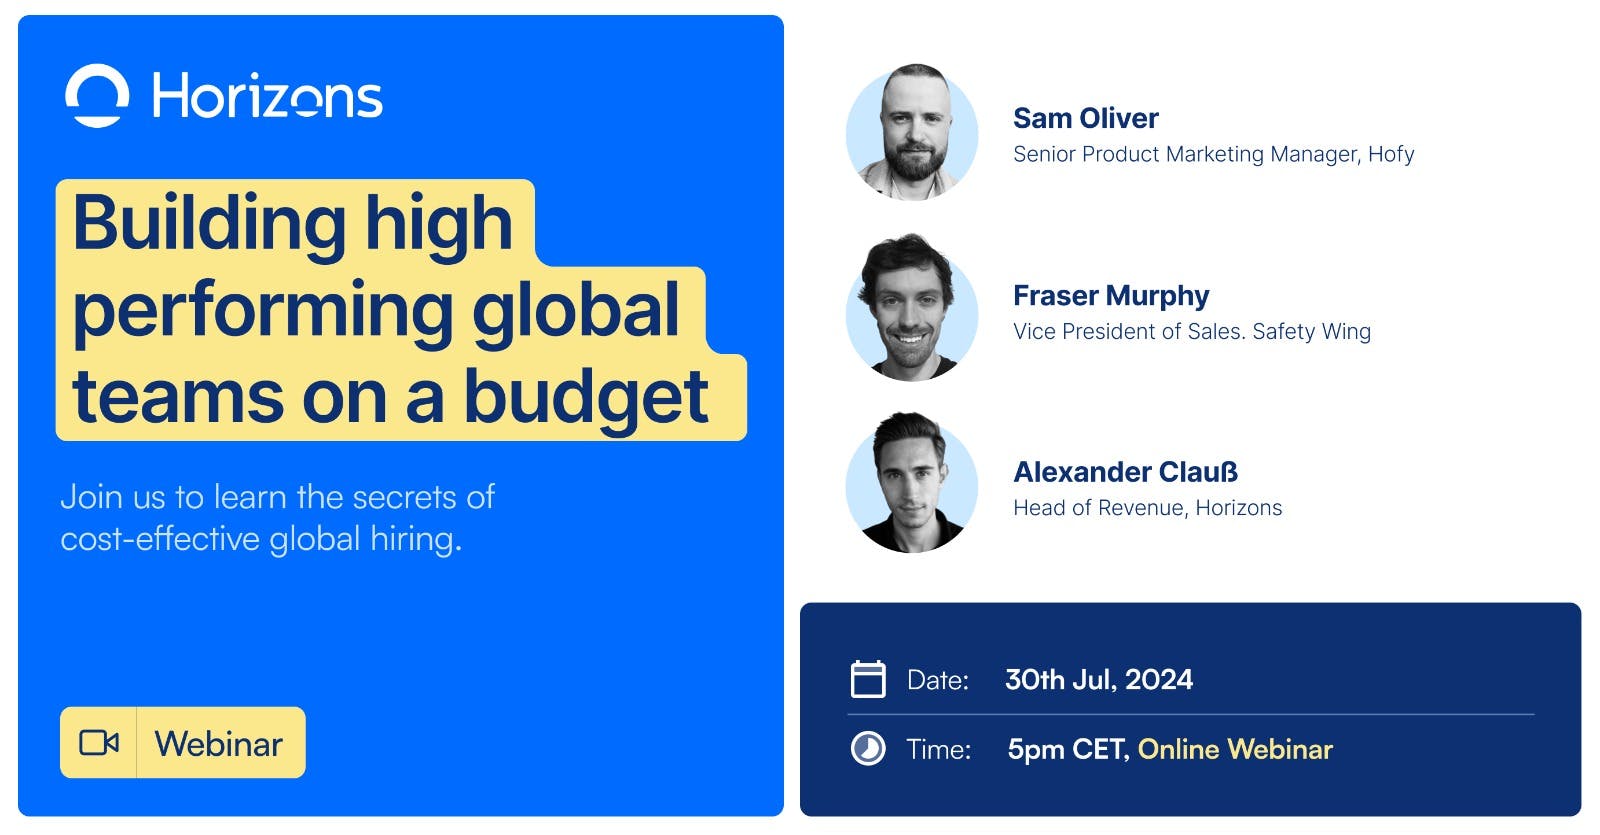 Building high performing global teams on a budget event cover photo